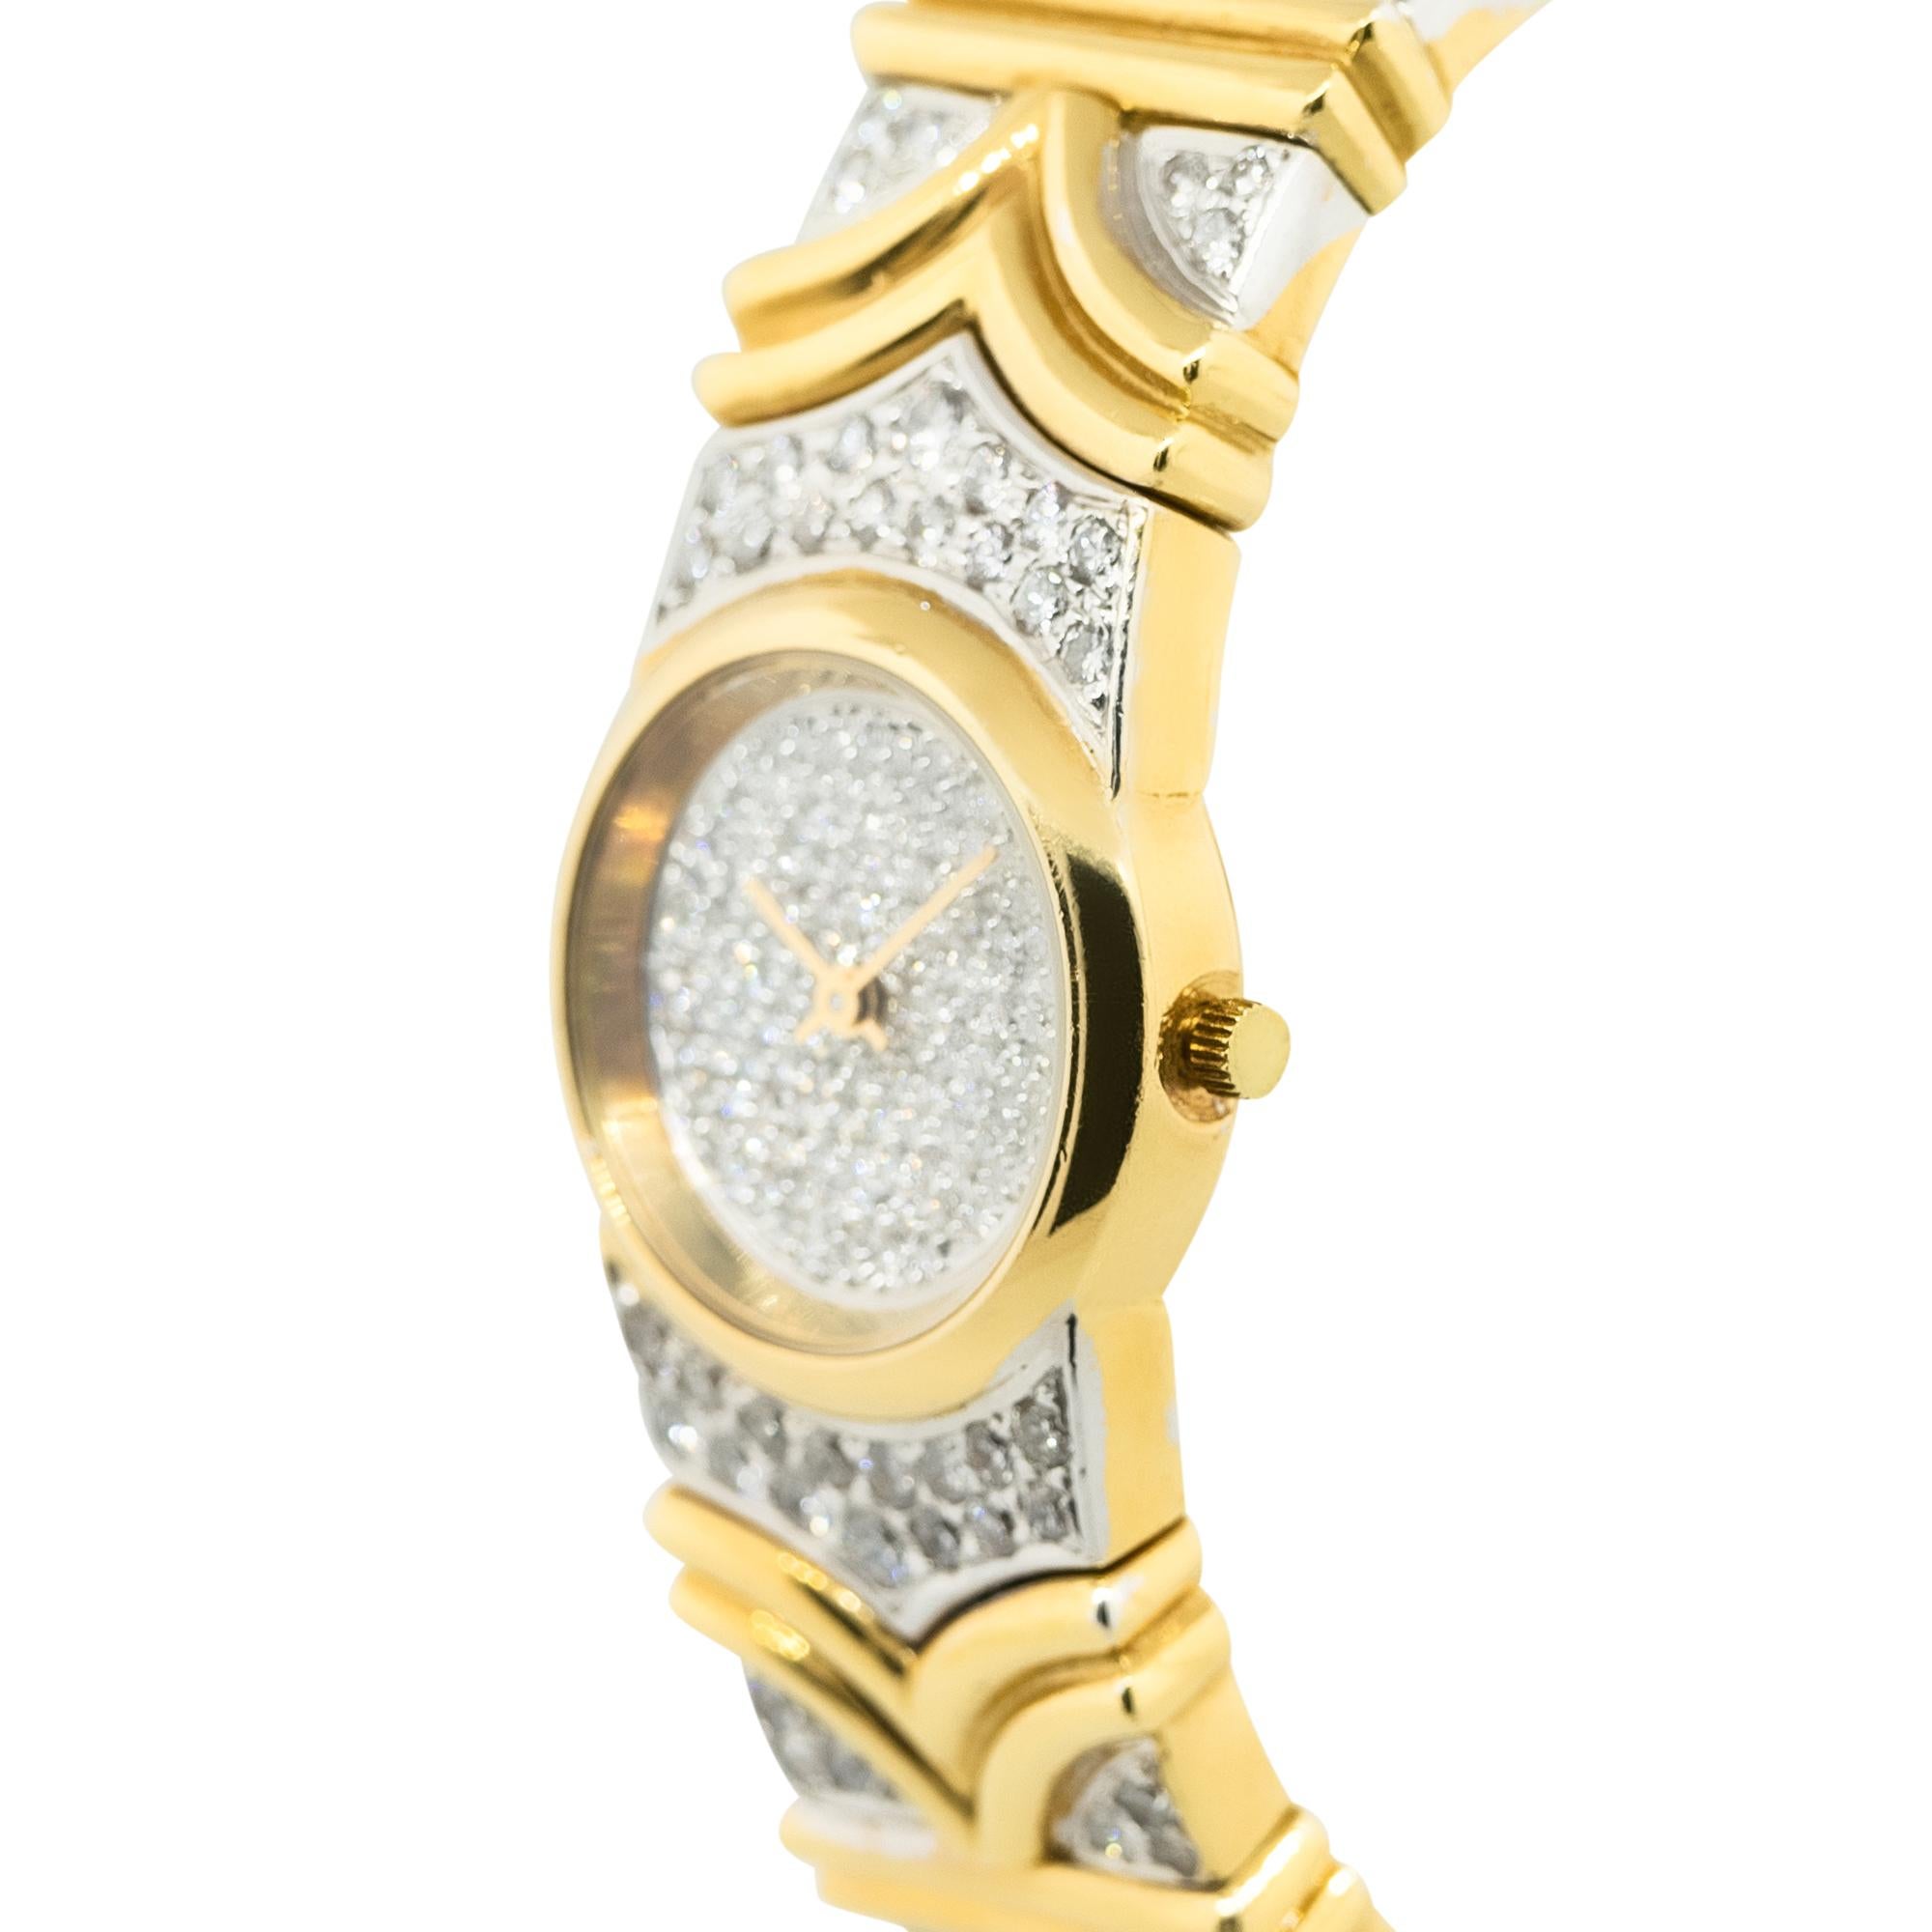 Material: 18k Yellow Gold
Dial: Pave Diamond Dial
Bezel: 18k Yellow Gold Smooth Bezel
Bracelet: 18k Yellow Gold Diamond Bracelet
Clasp: Cuff Style Bracelet
Movement: Automatic
Size: Will fit a 6